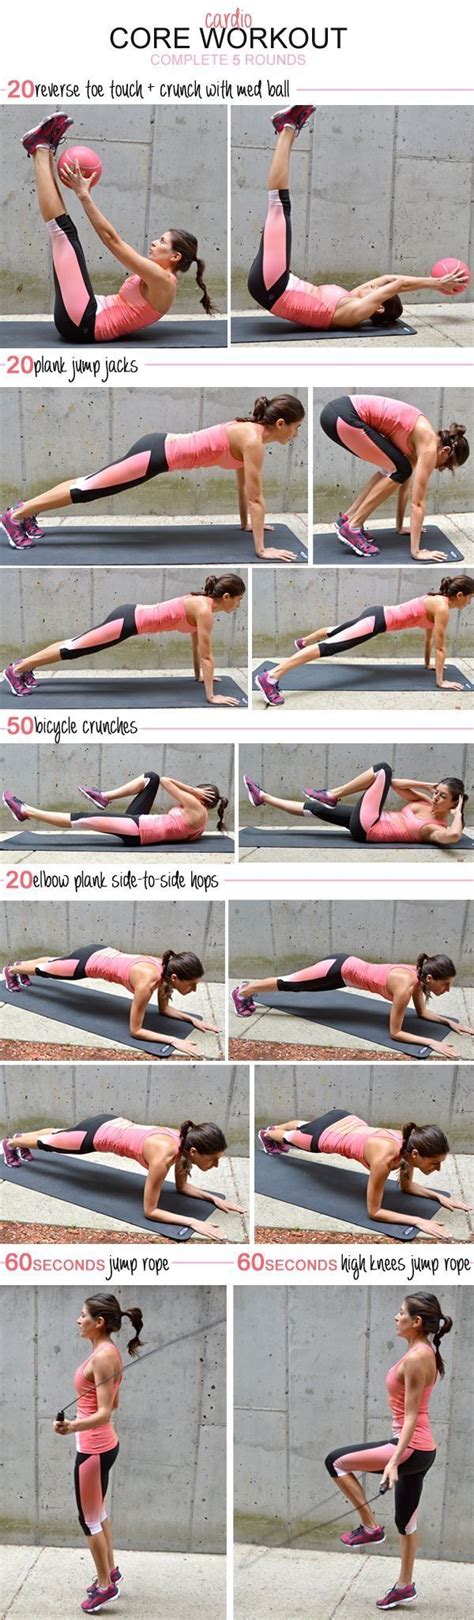 Cardio Core Workout Pictures Photos And Images For Facebook Tumblr Pinterest And Twitter